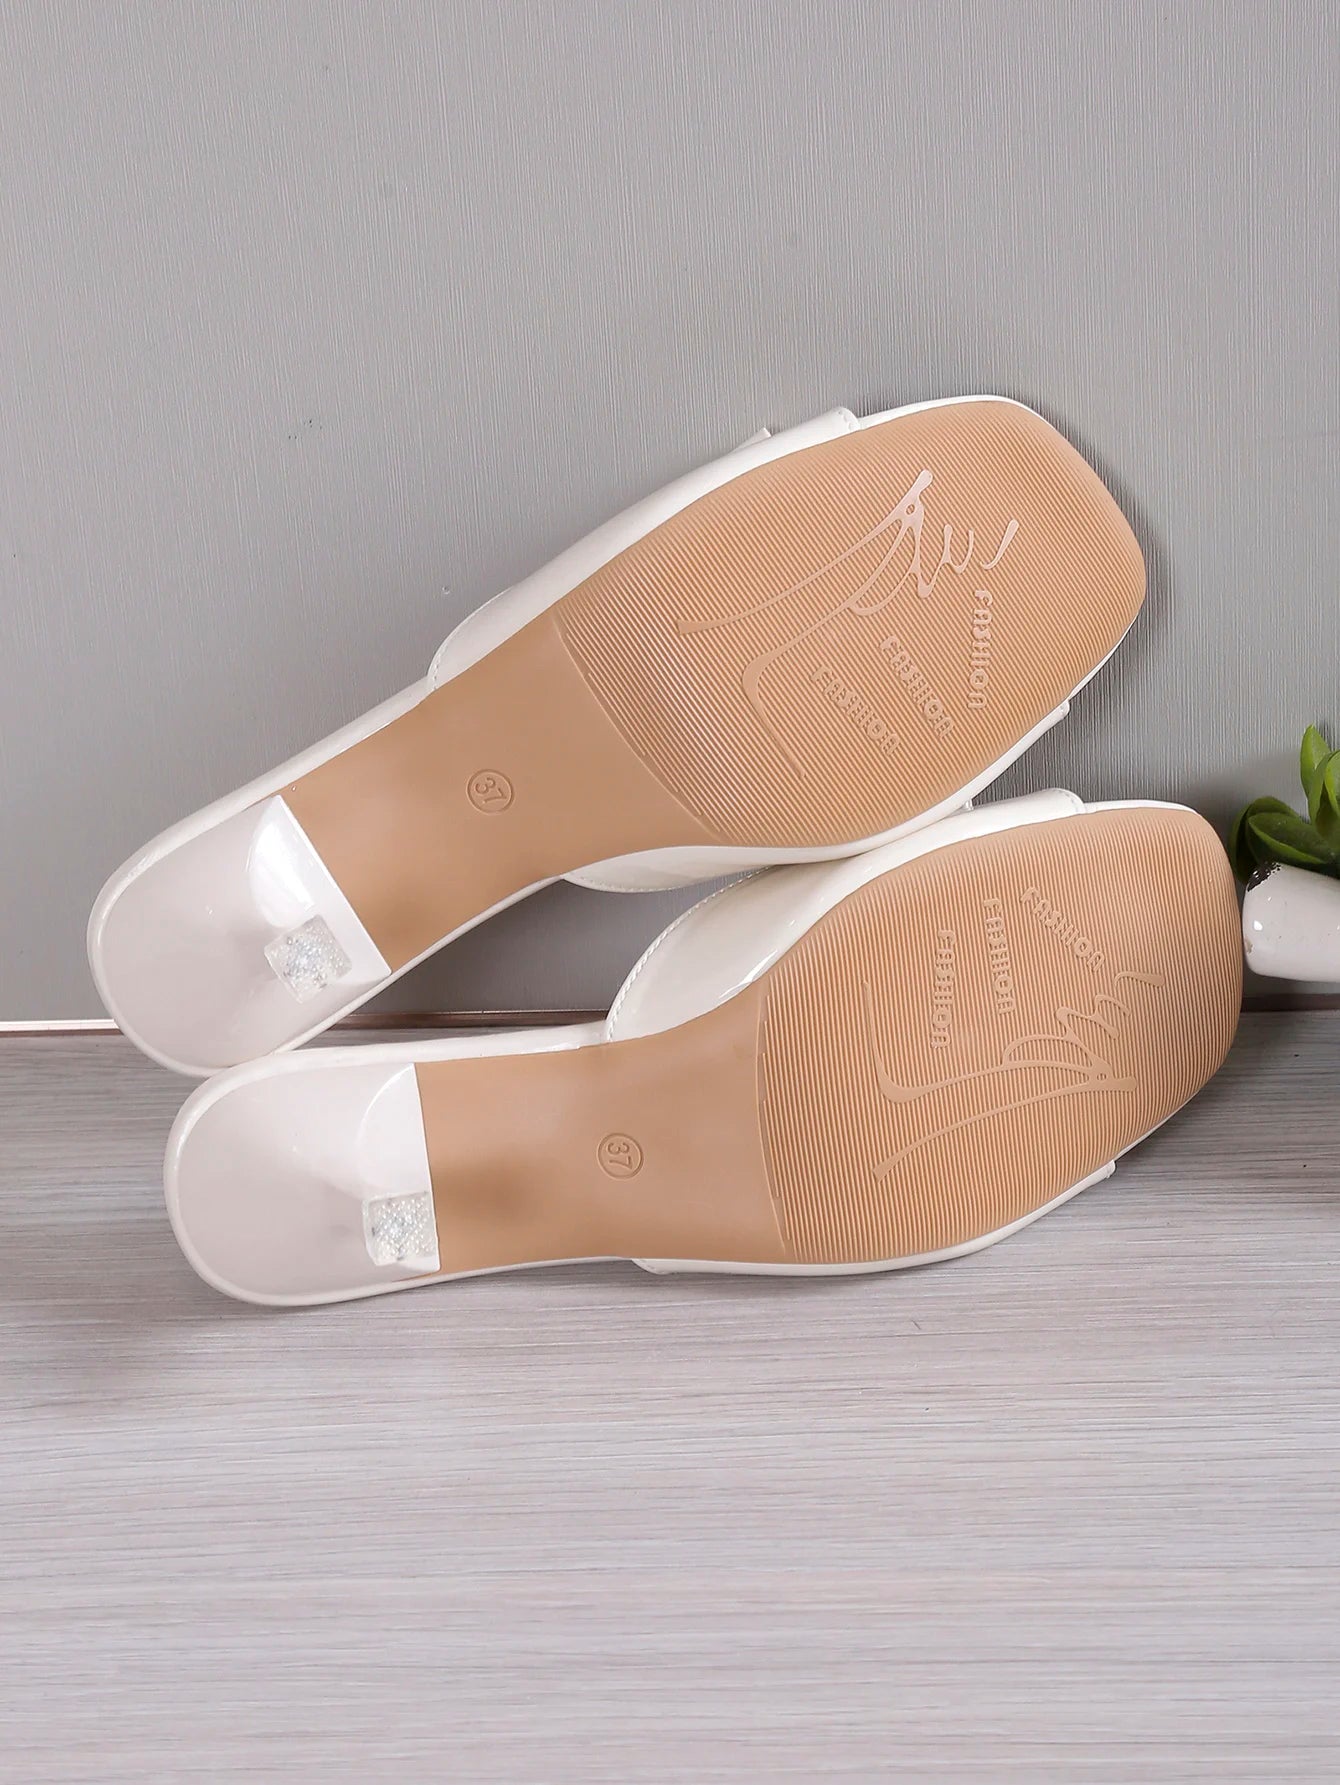 2023 New Fashion High Heel Open Toe Slippers for Women Wearing Bow Tie Outside, Square Head, Thin Heel Slippers for Women